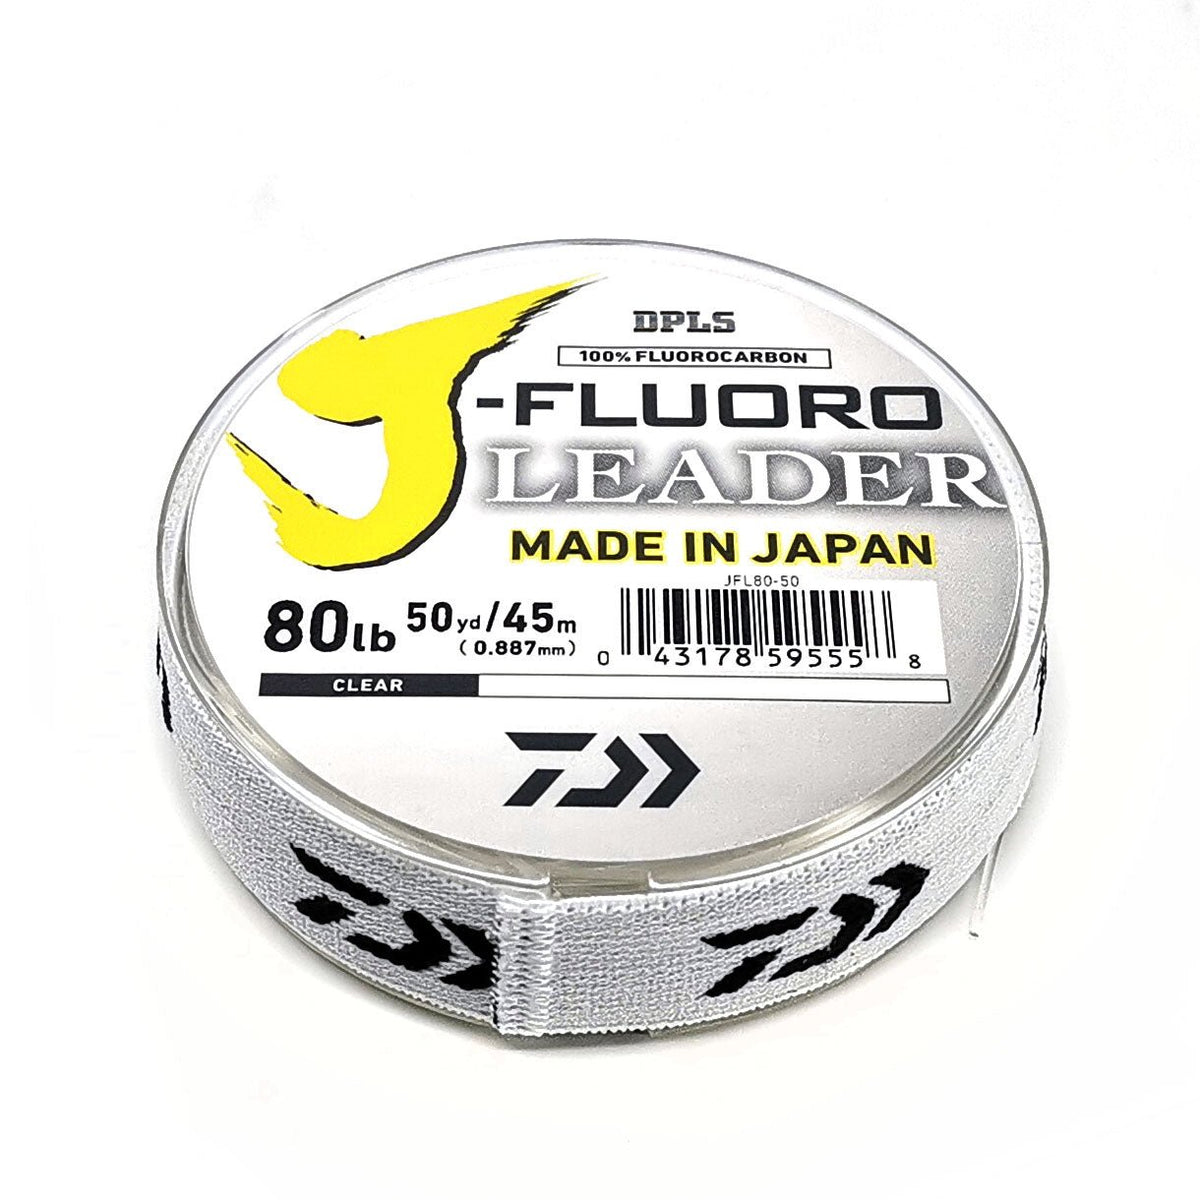 Fluorocarbon Leader Material: What's Up??